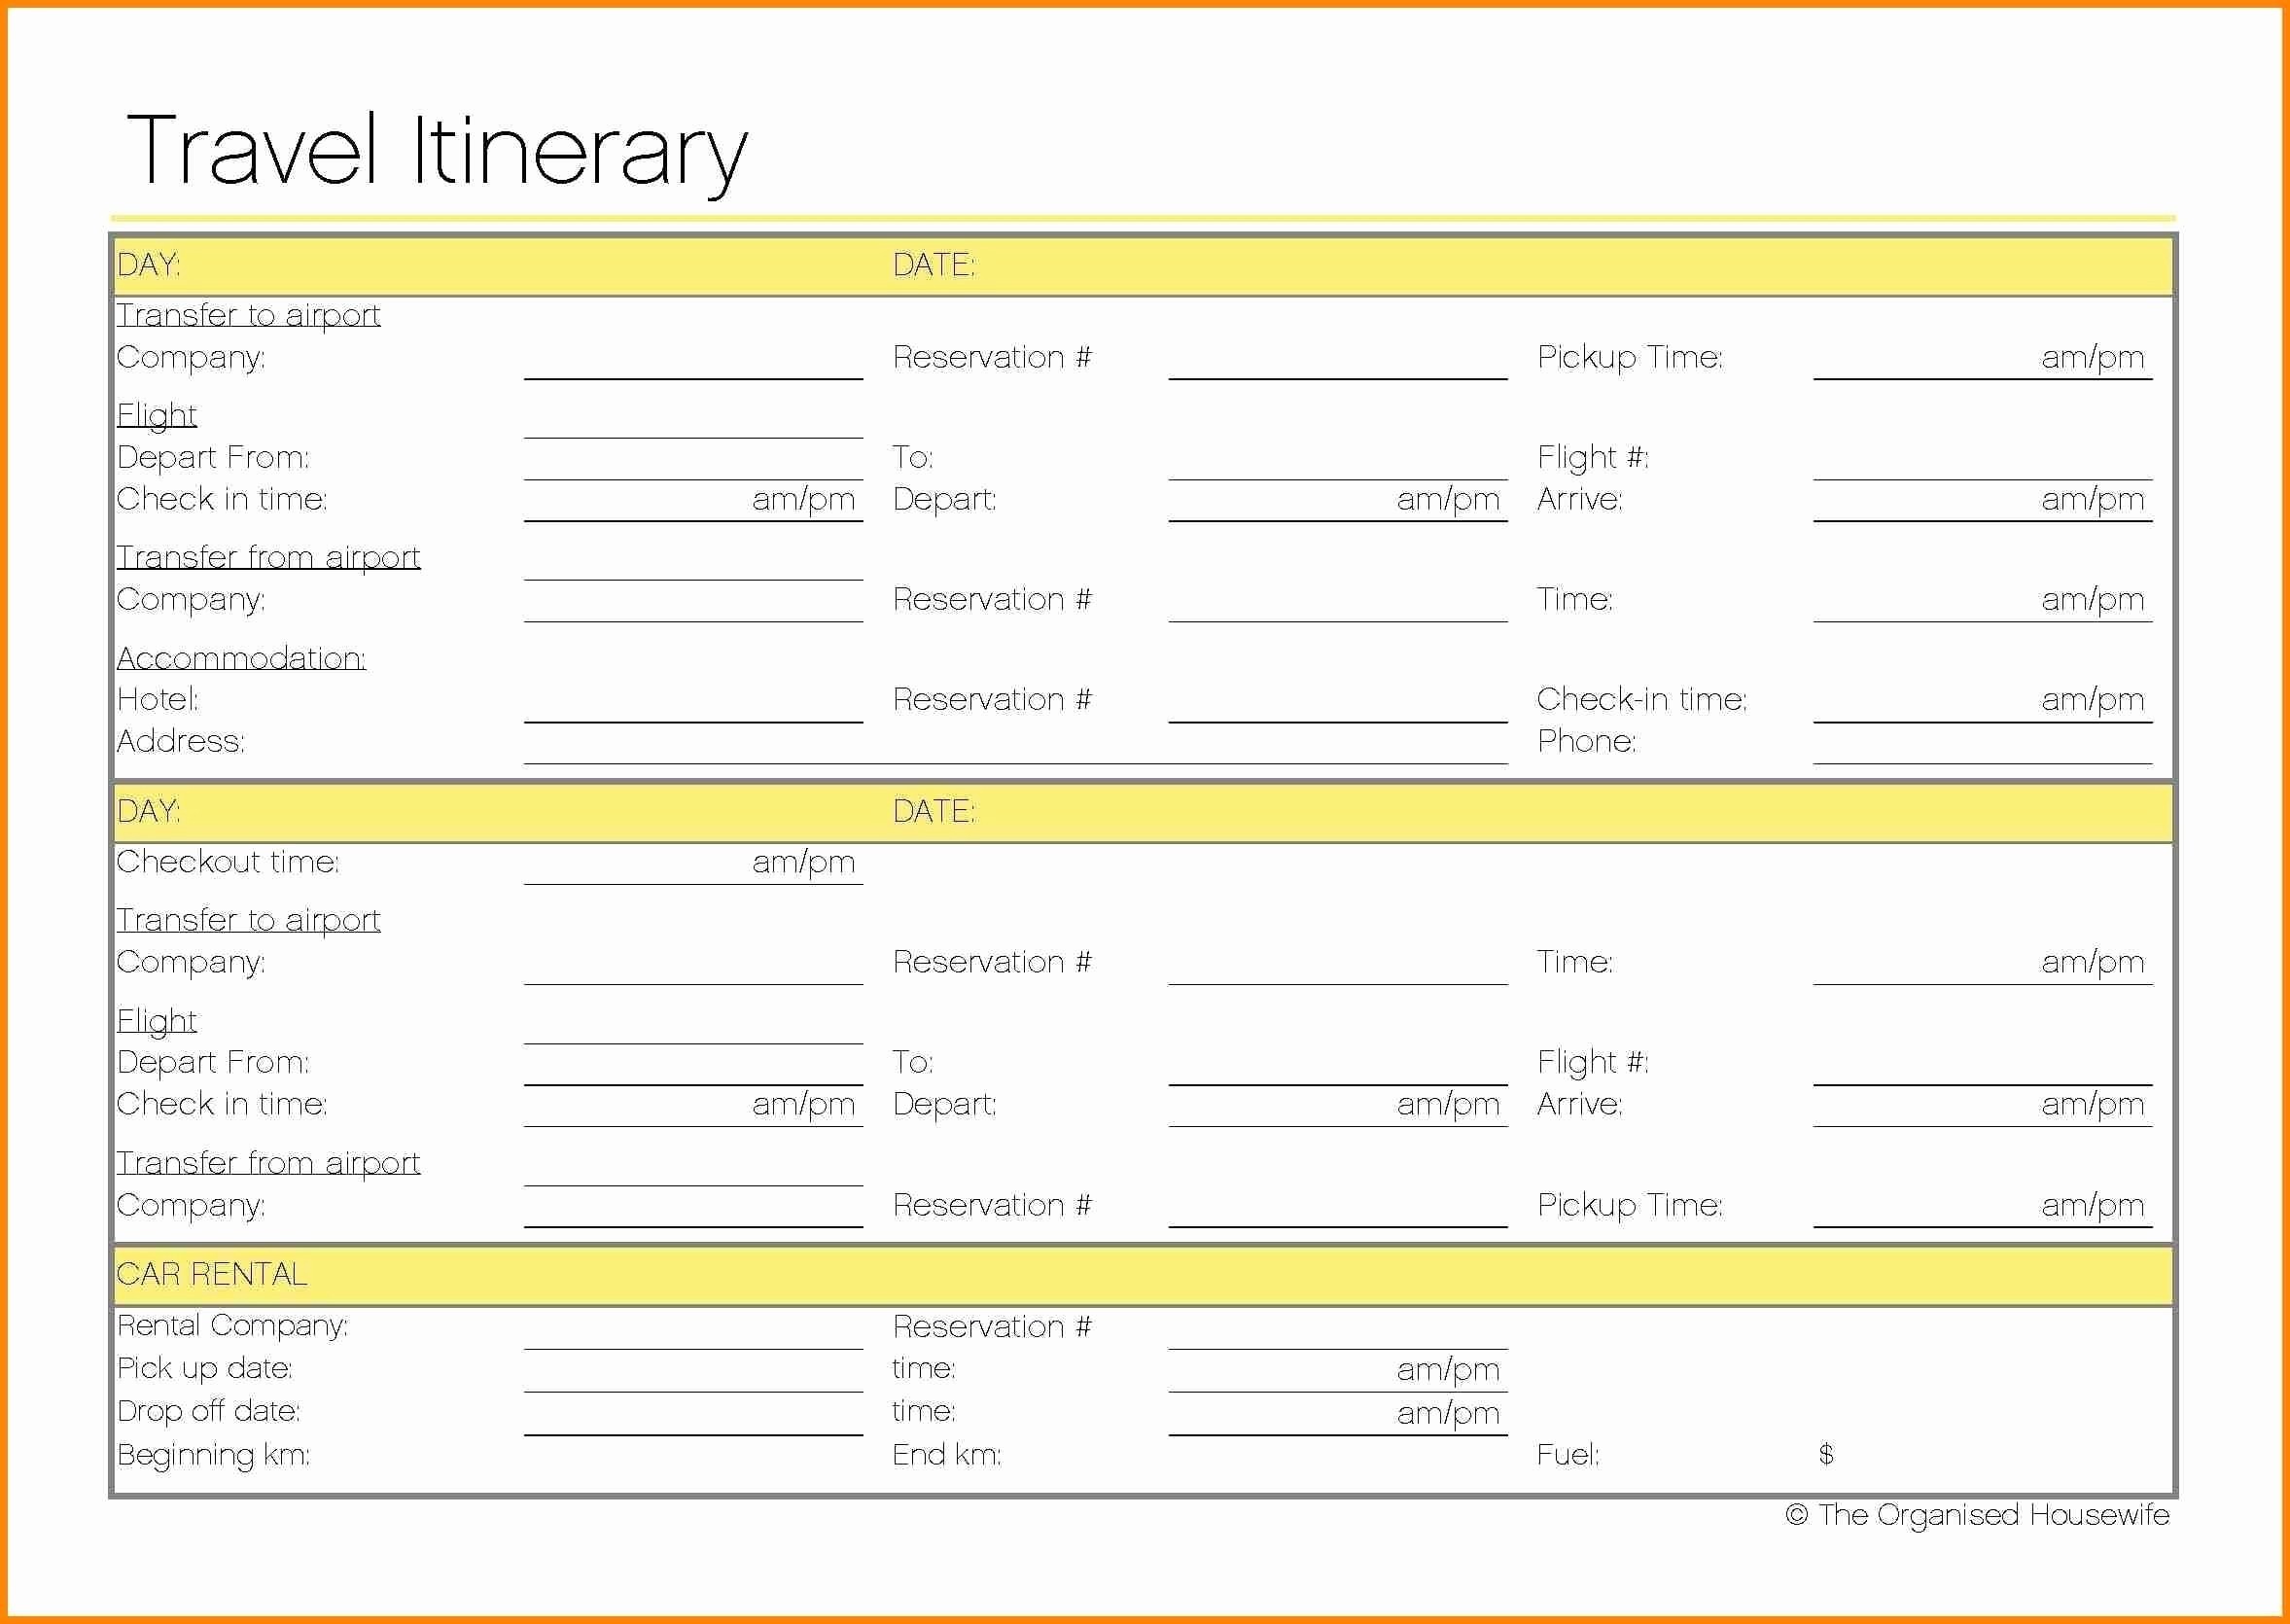 Travel Itinerary Template Google Docs Charlotte Clergy Coalition Document